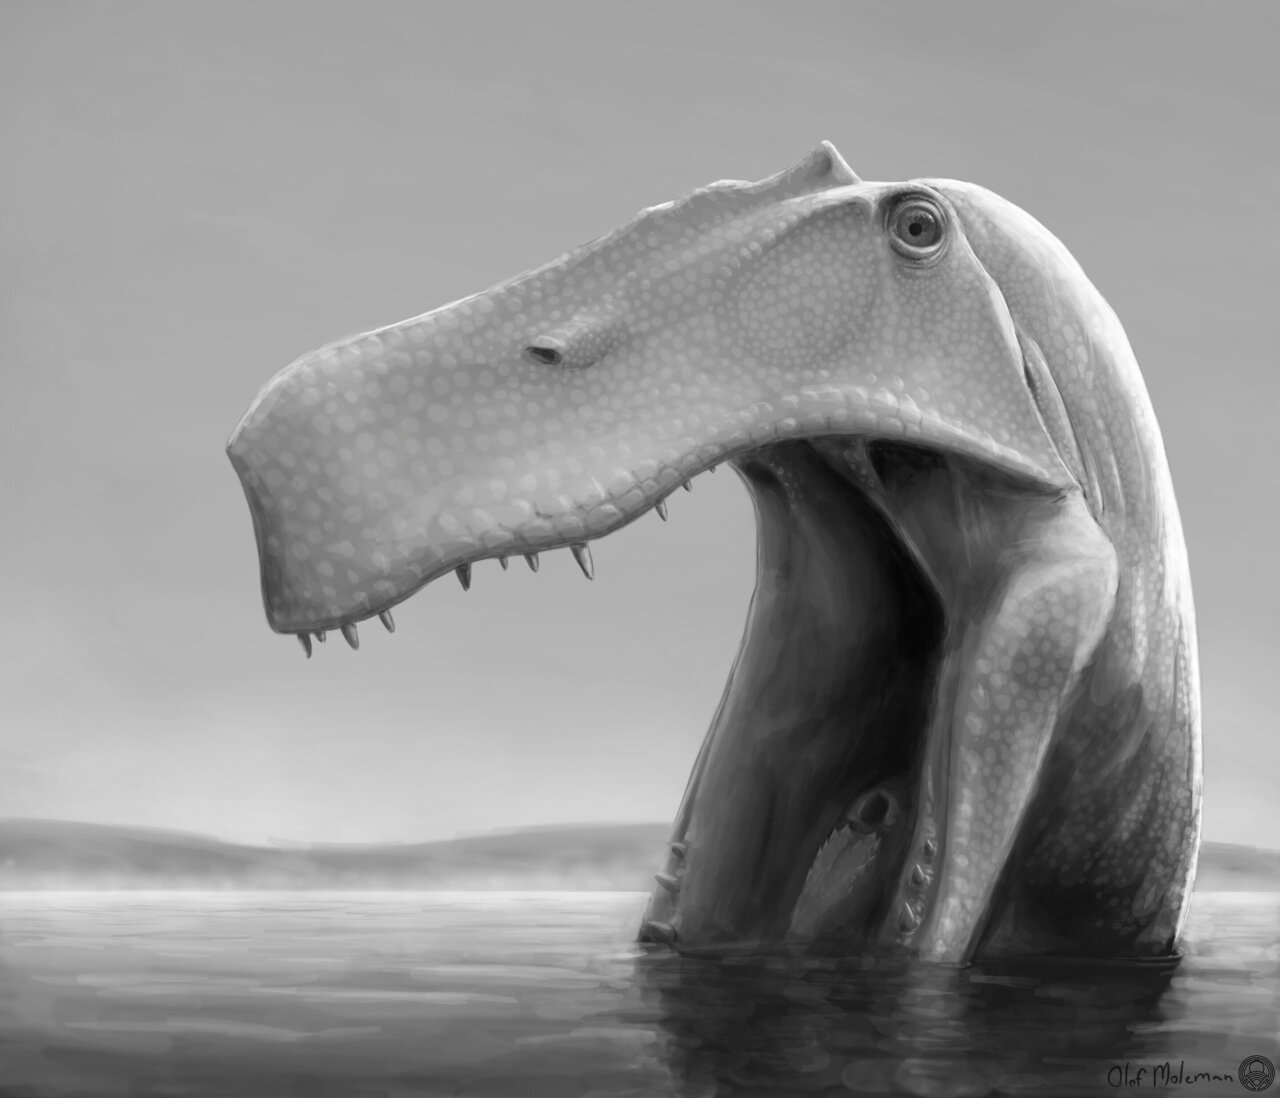 Brazil in the Early Cretaceous, 115 Ma ago: the predatory dinosaur Irritator challengeri forages with spreading lower jaws in shallow water for small prey, including fish.